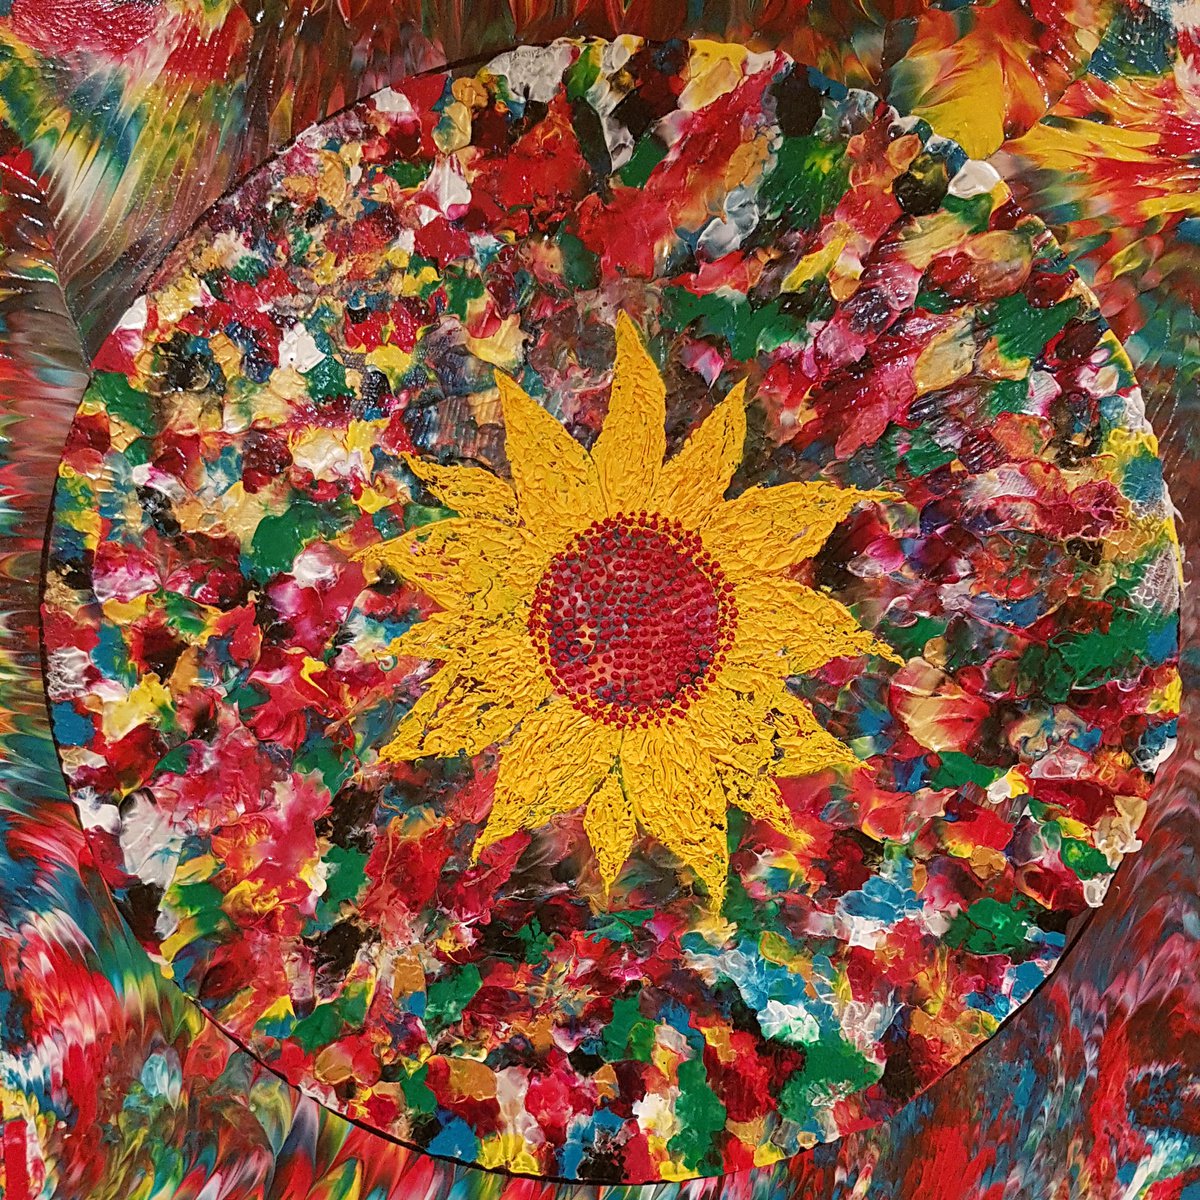 Psychedelic Sunflower by Alexandra Romano